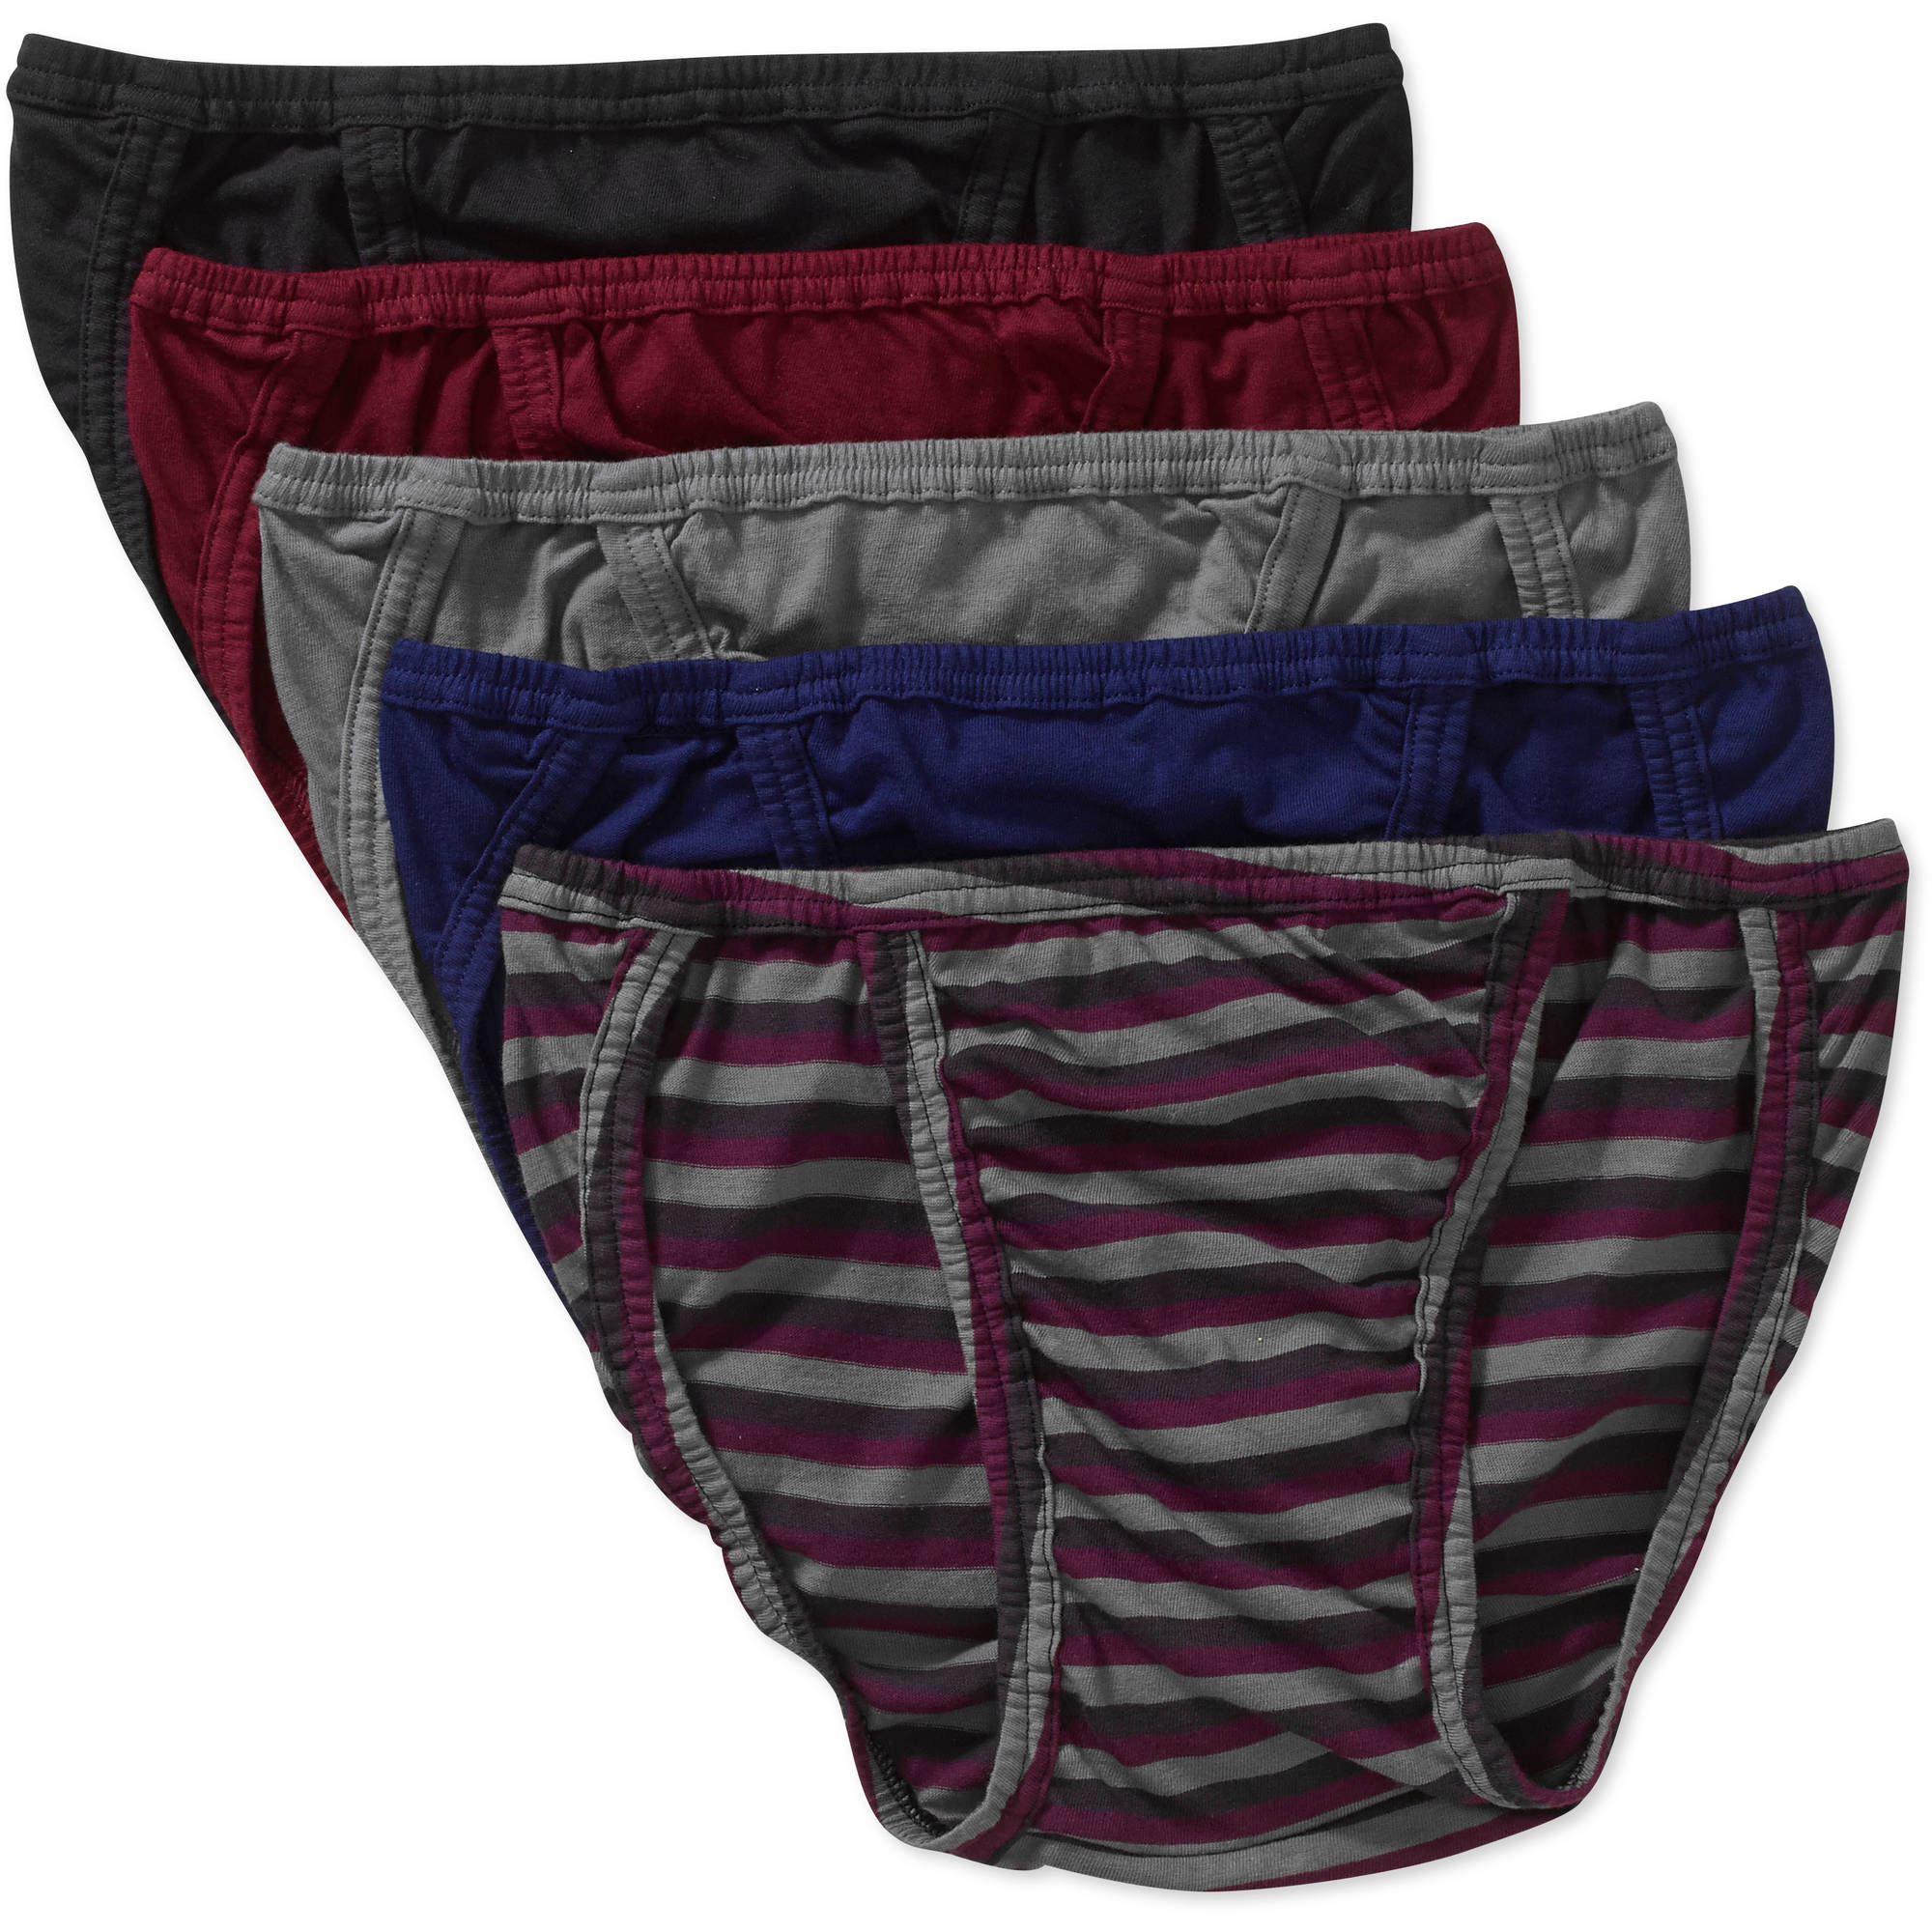 Men's assorted cotton string bikini, 5 pack - assorted color may vary - image 3 of 4